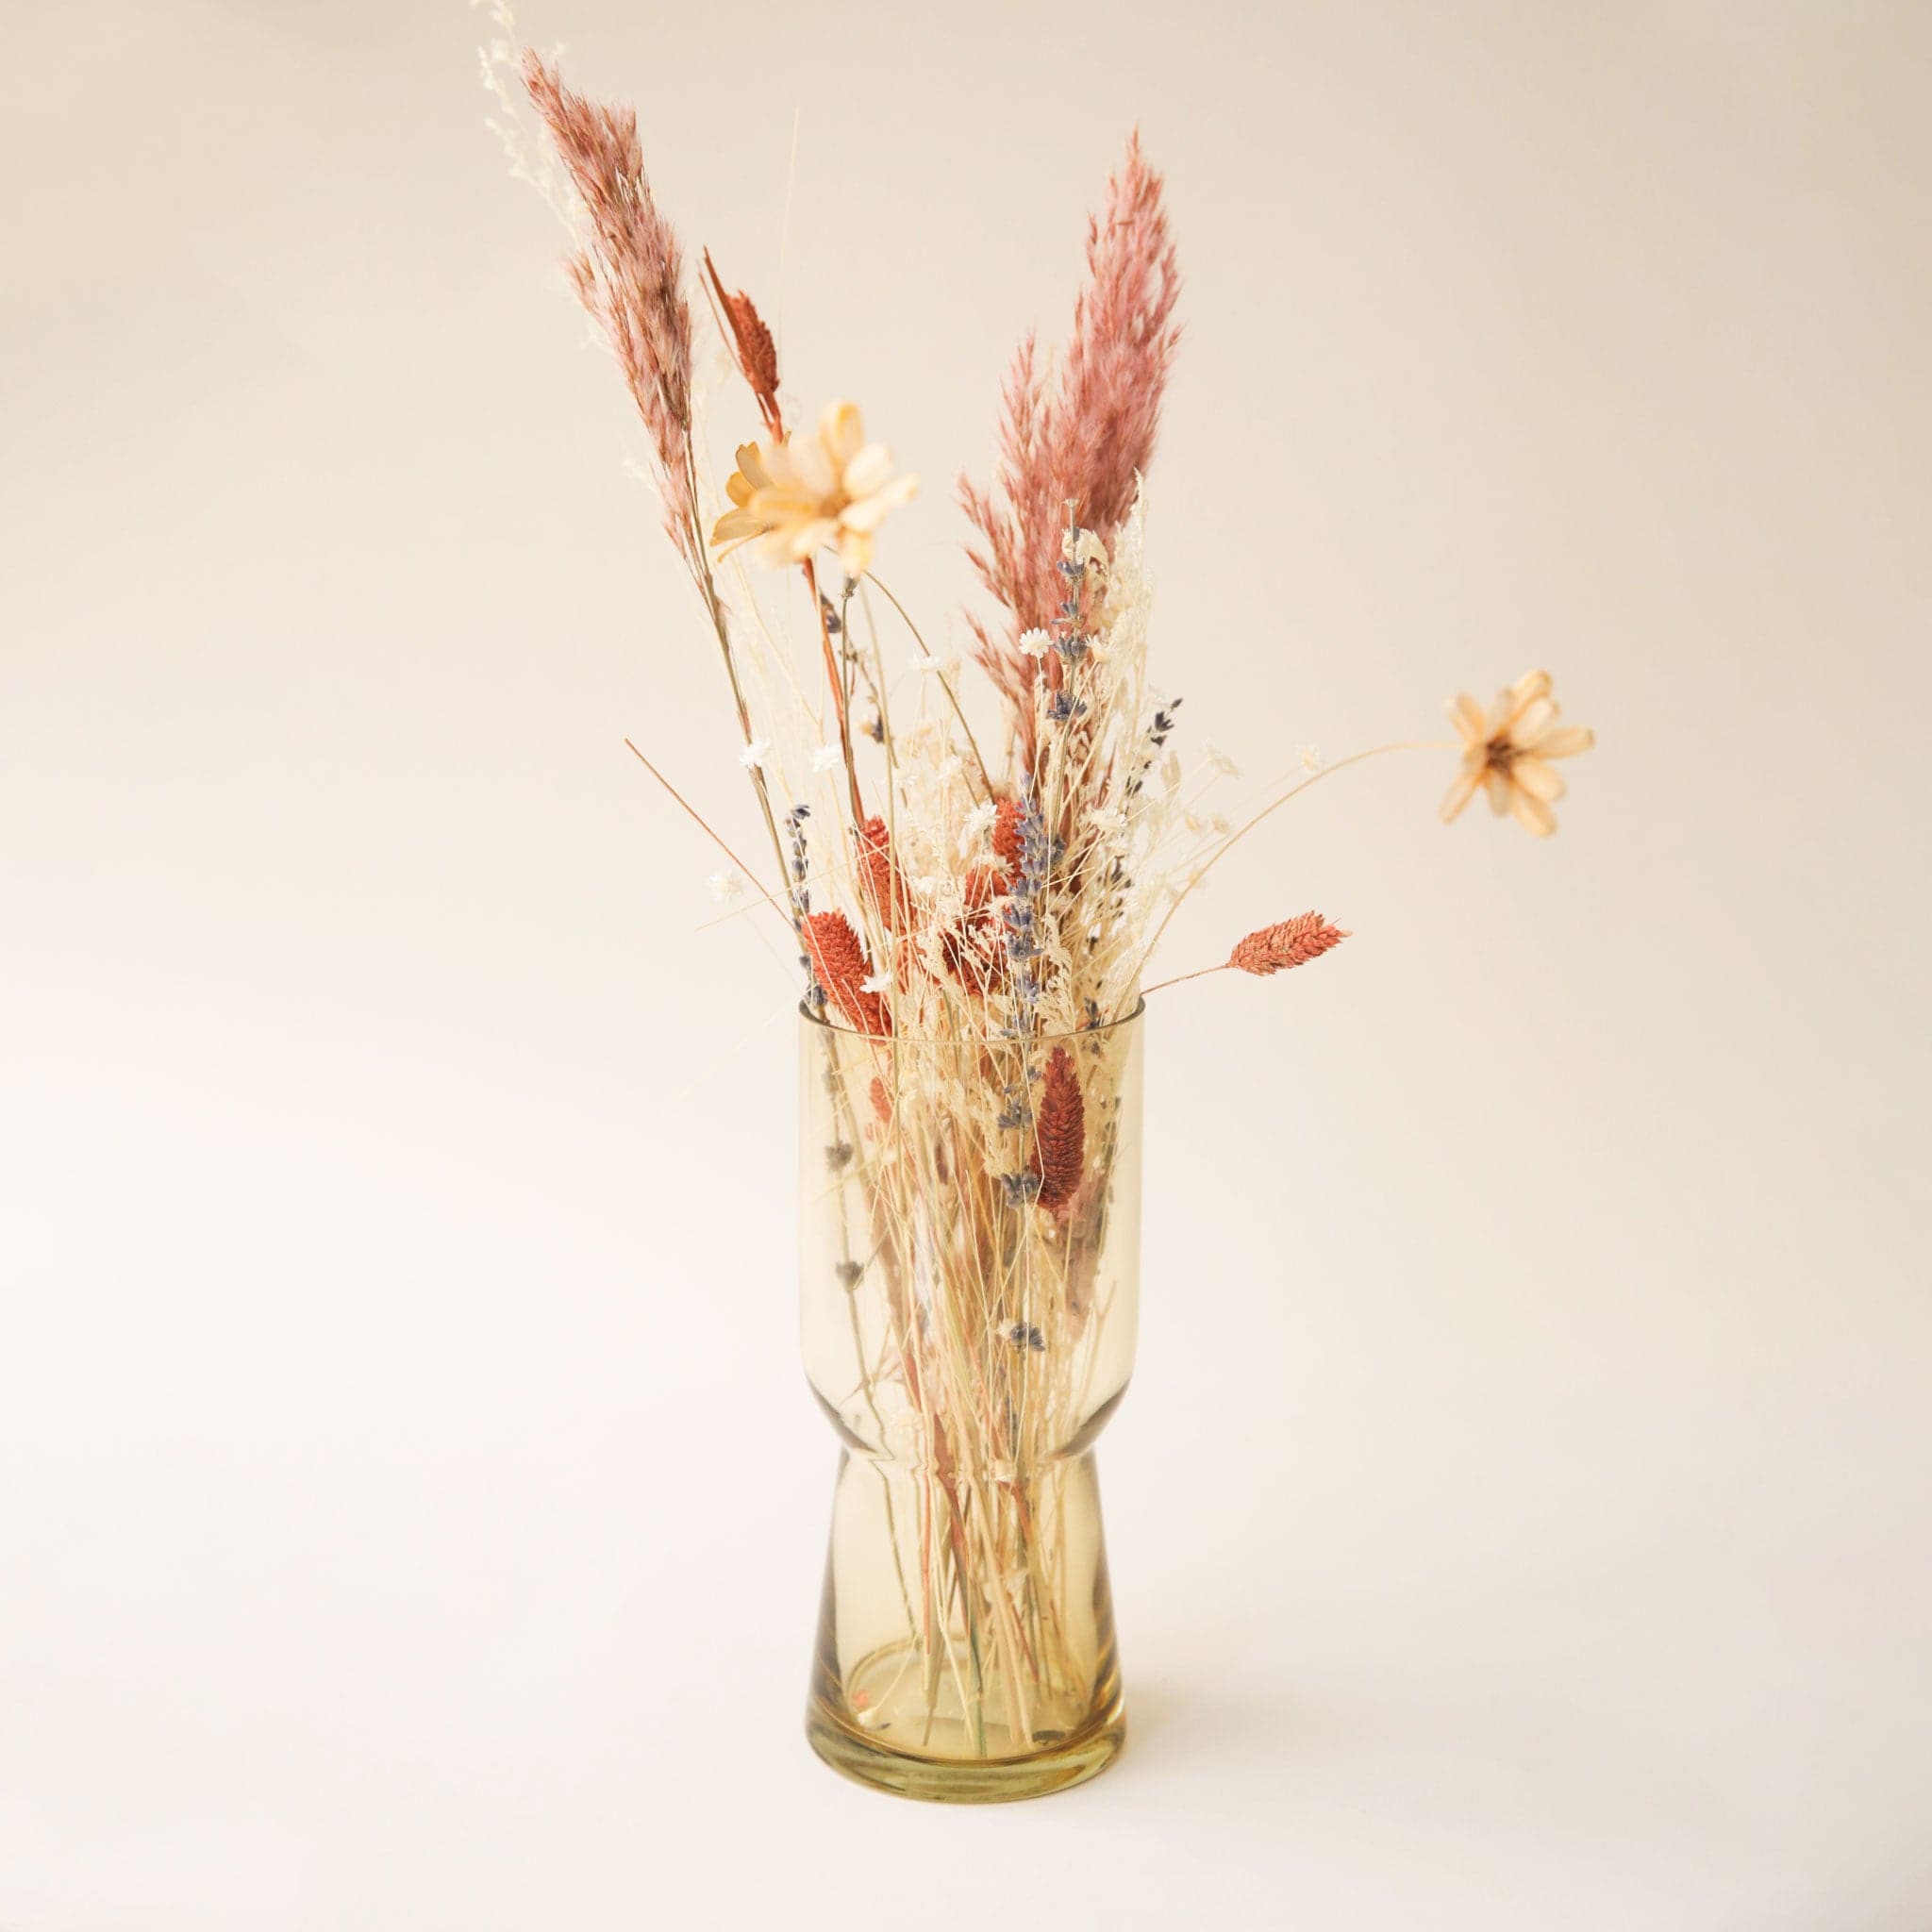 A compote style glass vase in an amber color in front of a white ground with the taller thinner version of the vase filled with dried florals.